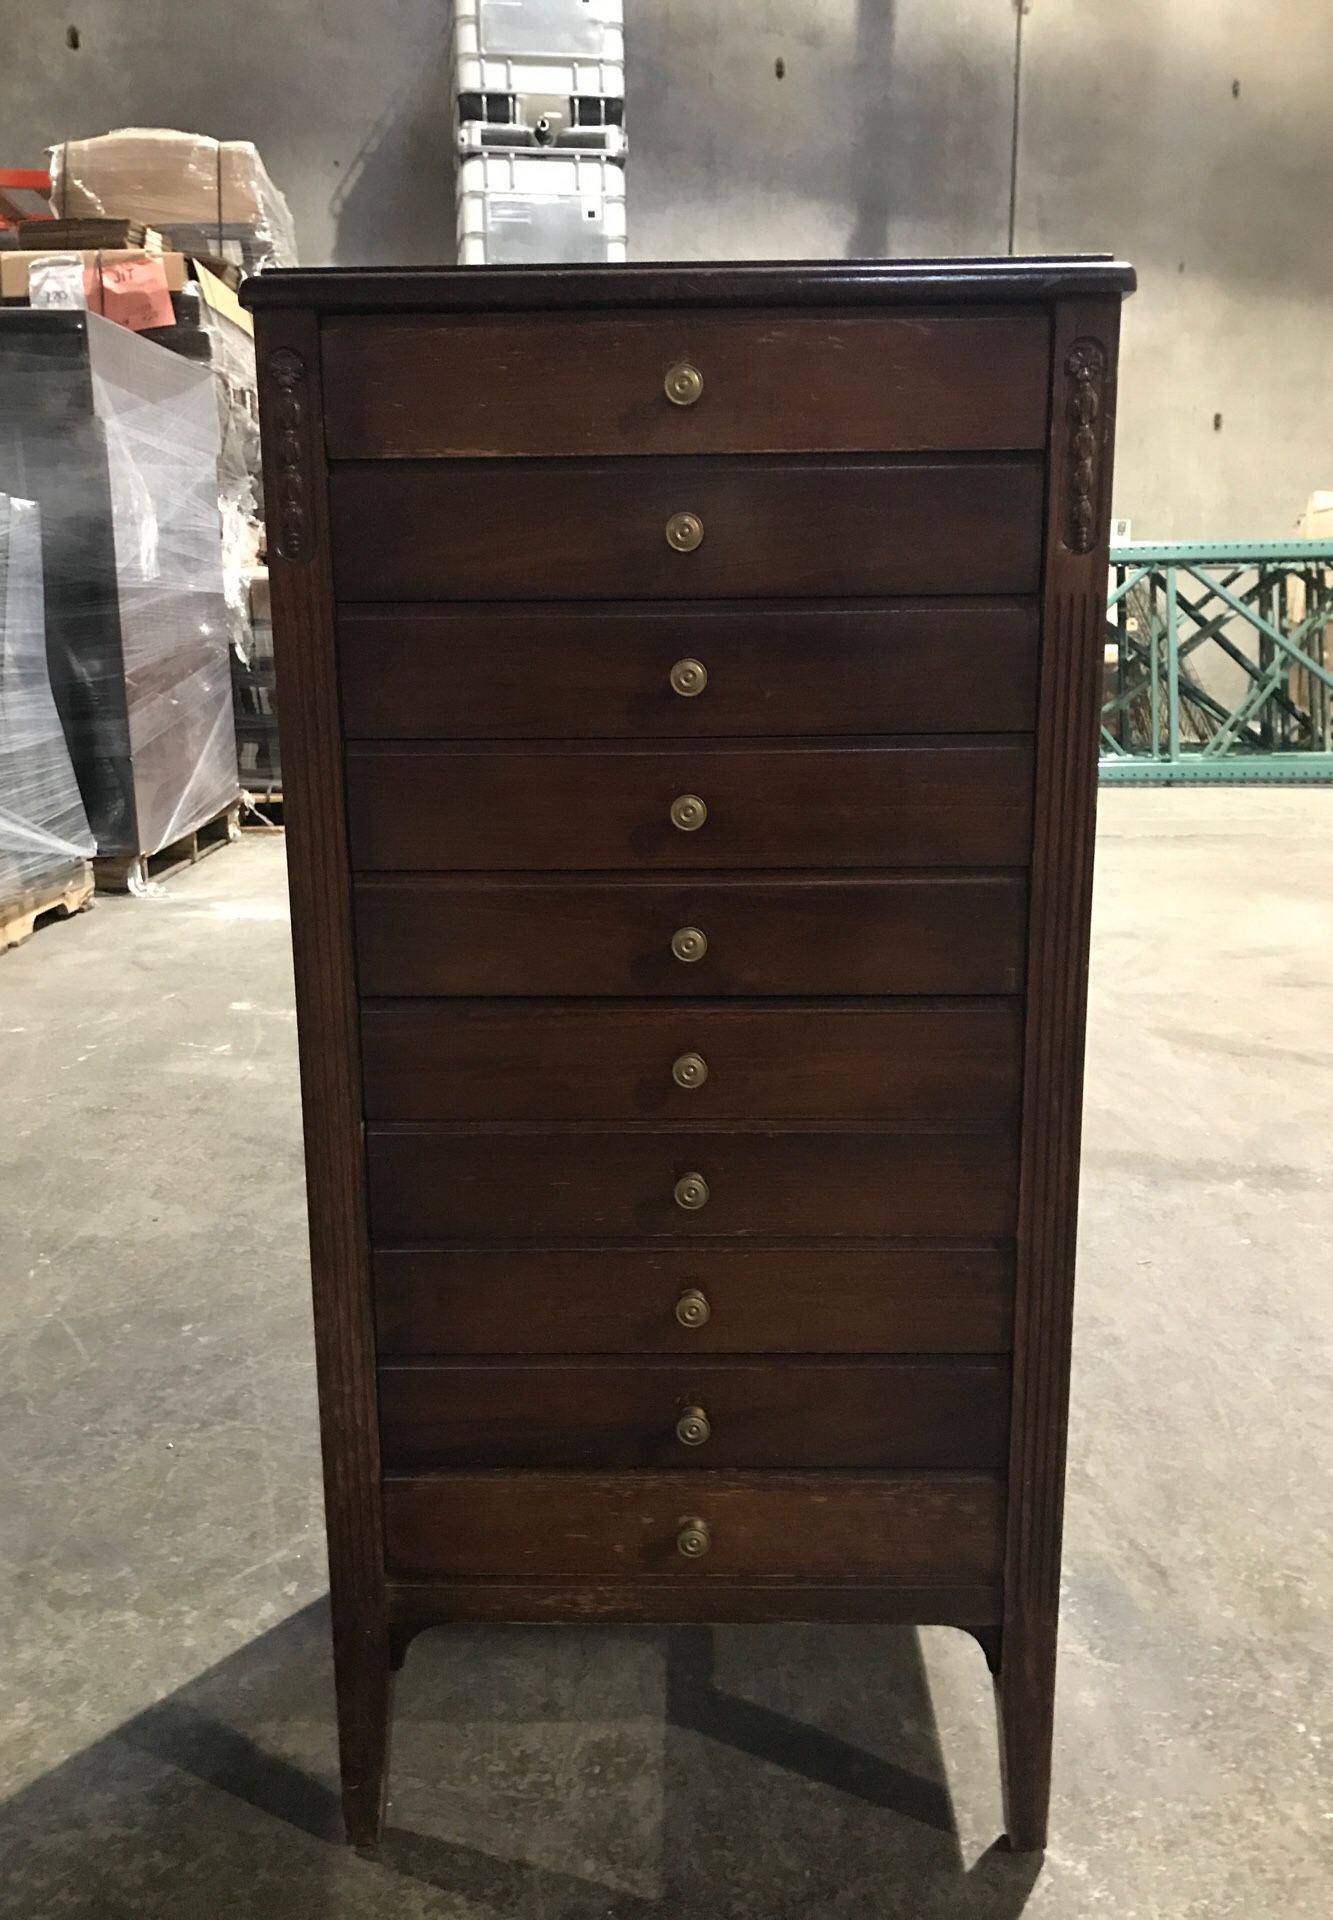 Antique Trouser/ Jewelry/ Map Dresser Cabinet???